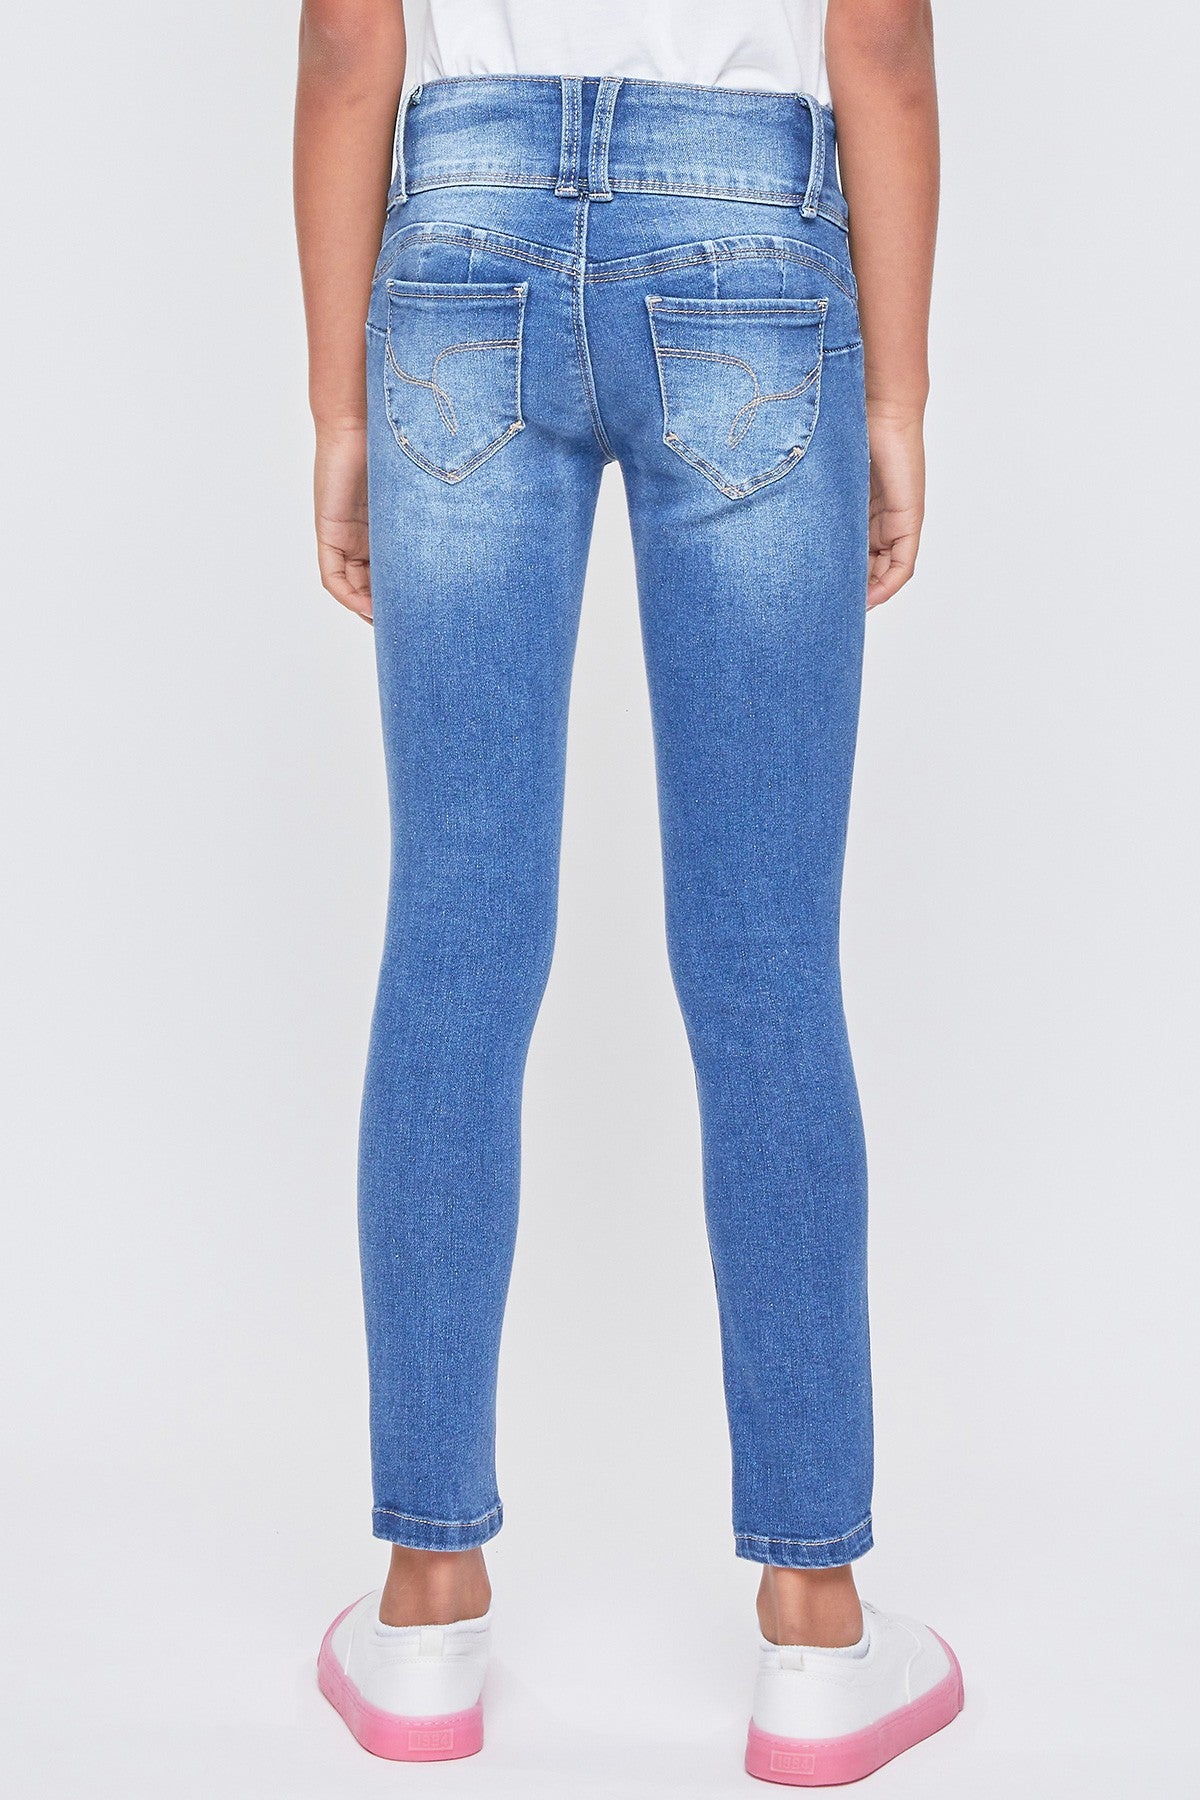 BE. YOU!  Benly Skinny Jeans for Girls